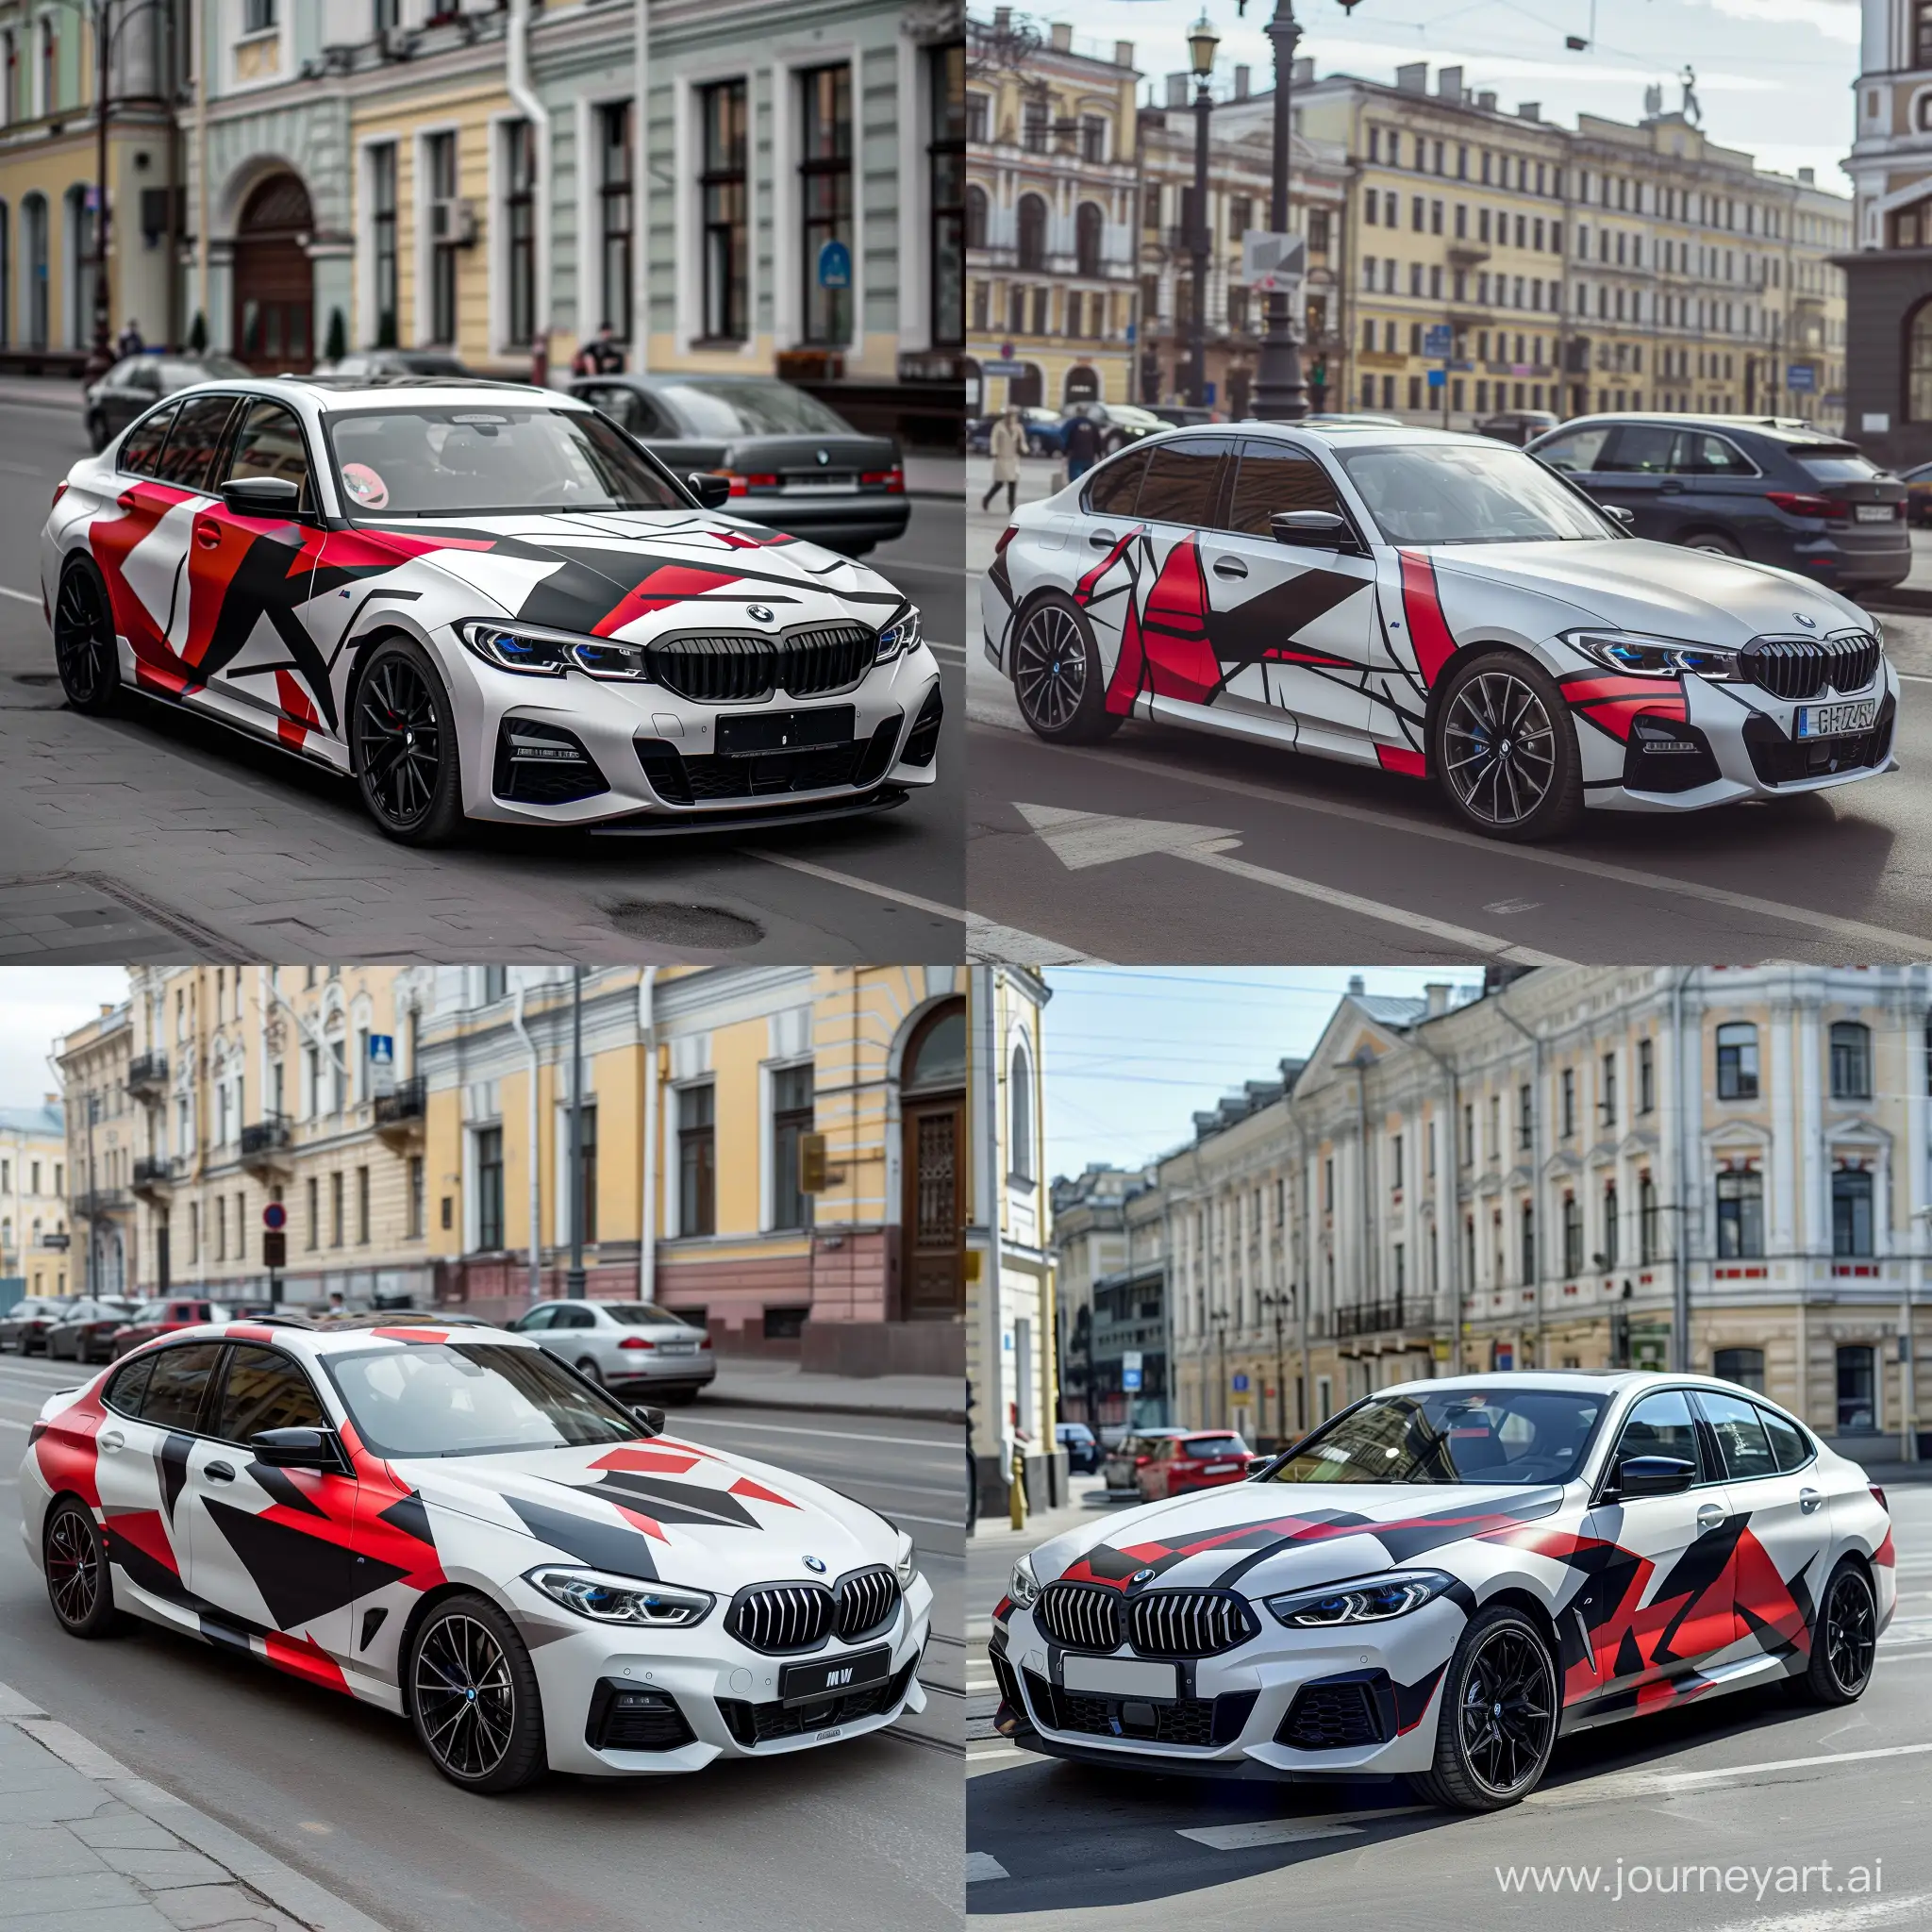 BMW g20 330 in a coloring of white, red and black sharp lines, on a city street of St. Petersburg